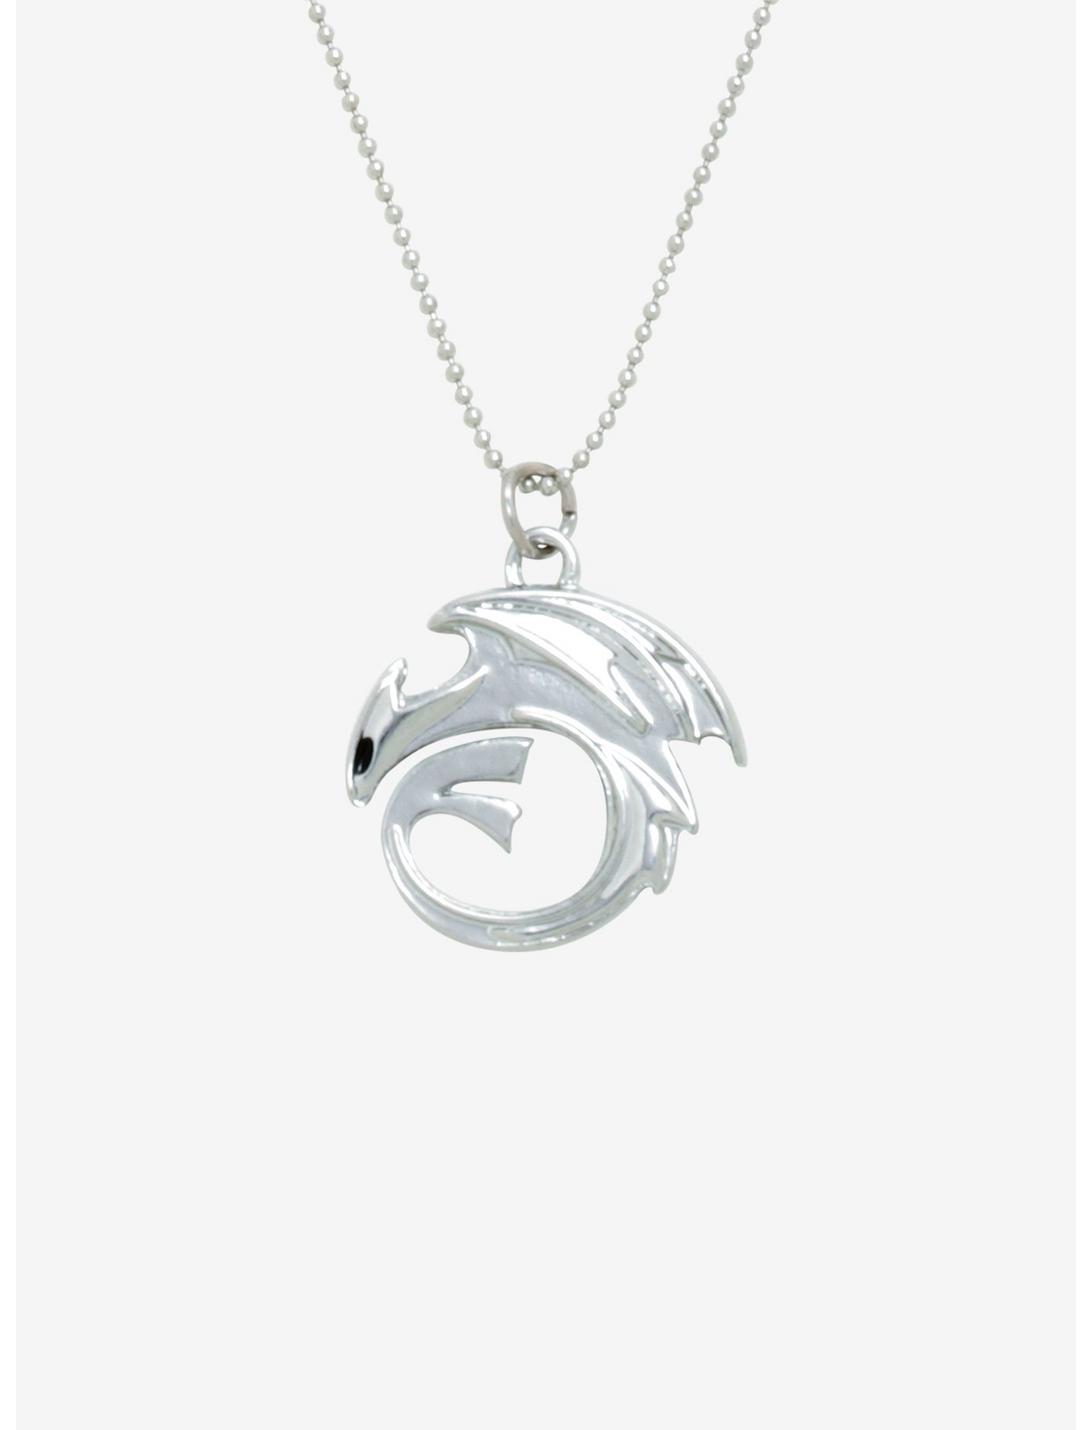 How To Train Your Dragon Toothless Dainty Pendant, , hi-res